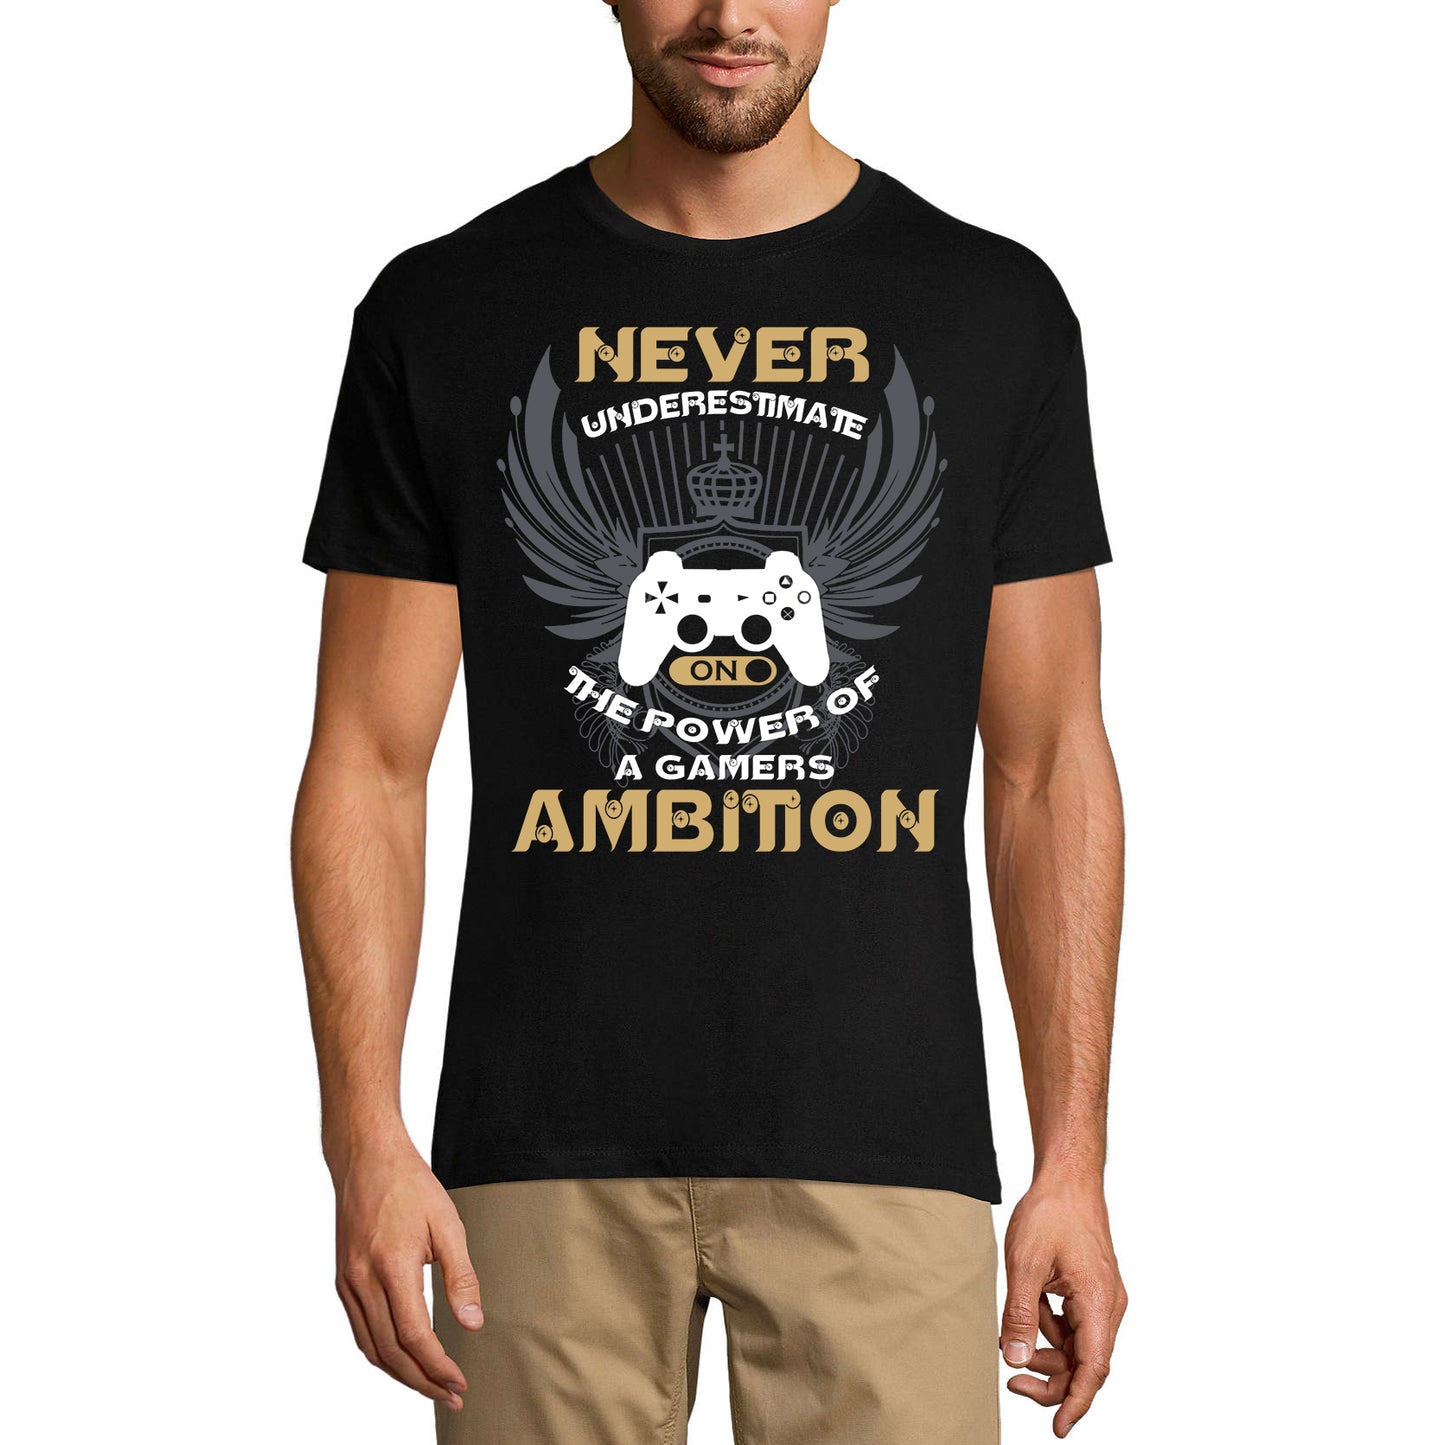 ULTRABASIC Men's T-Shirt Never Underestimate Power of a Gamers Ambition Shirt mode on level up dad gamer i paused my game alien player ufo playstation tee shirt clothes gaming apparel gifts super mario nintendo call of duty graphic tshirt video game funny geek gift for the gamer fortnite pubg humor son father birthday